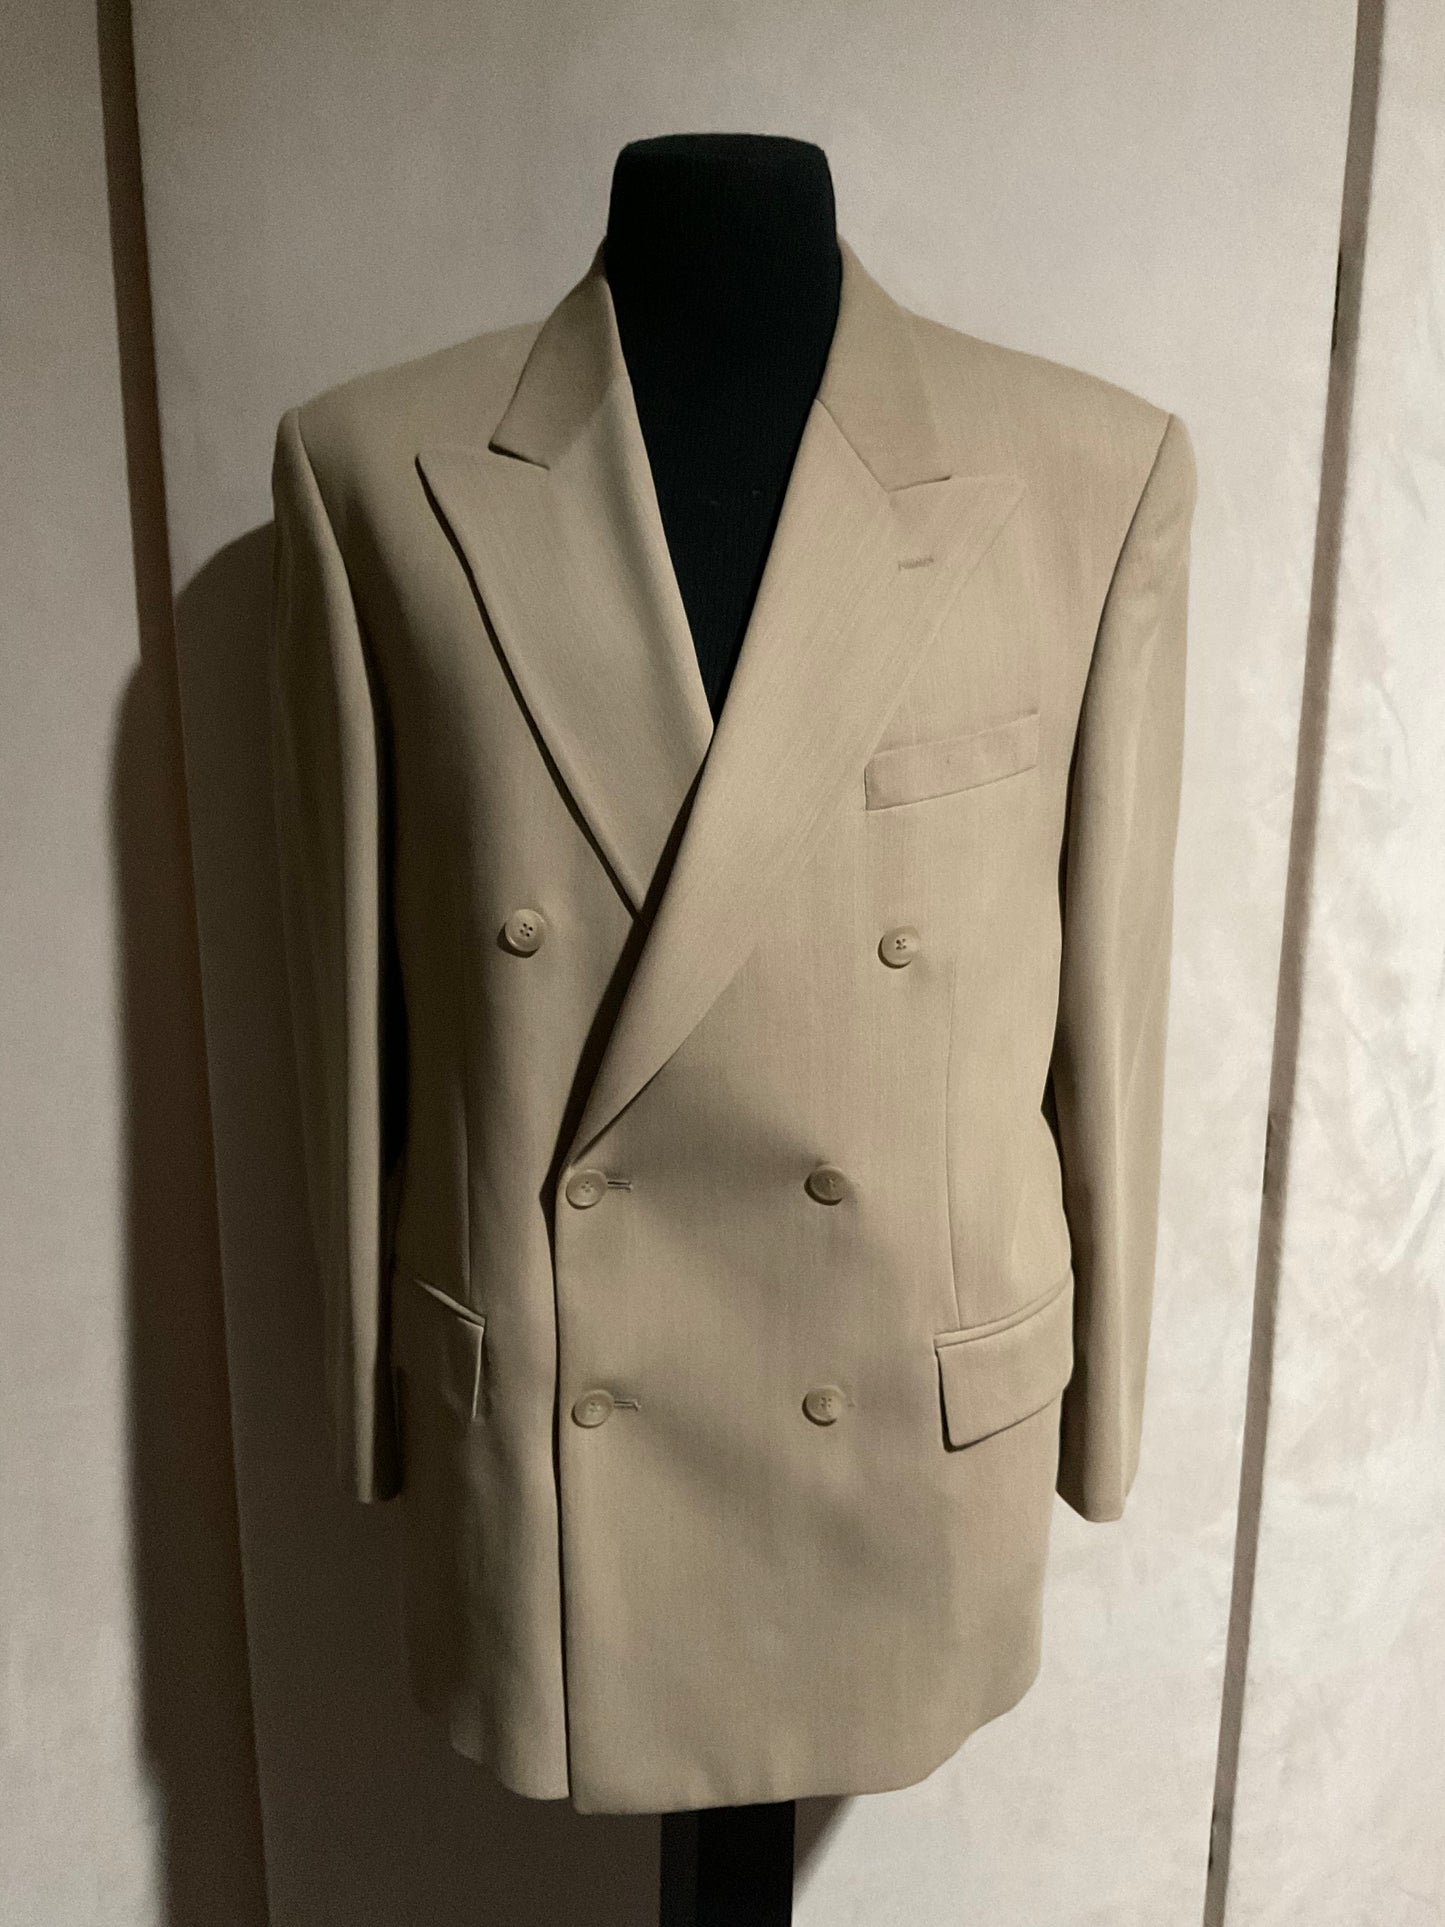 R P SUIT / DOUBLE BREASTED / CAMEL CREPE / 40 REG / MADE IN CANADA